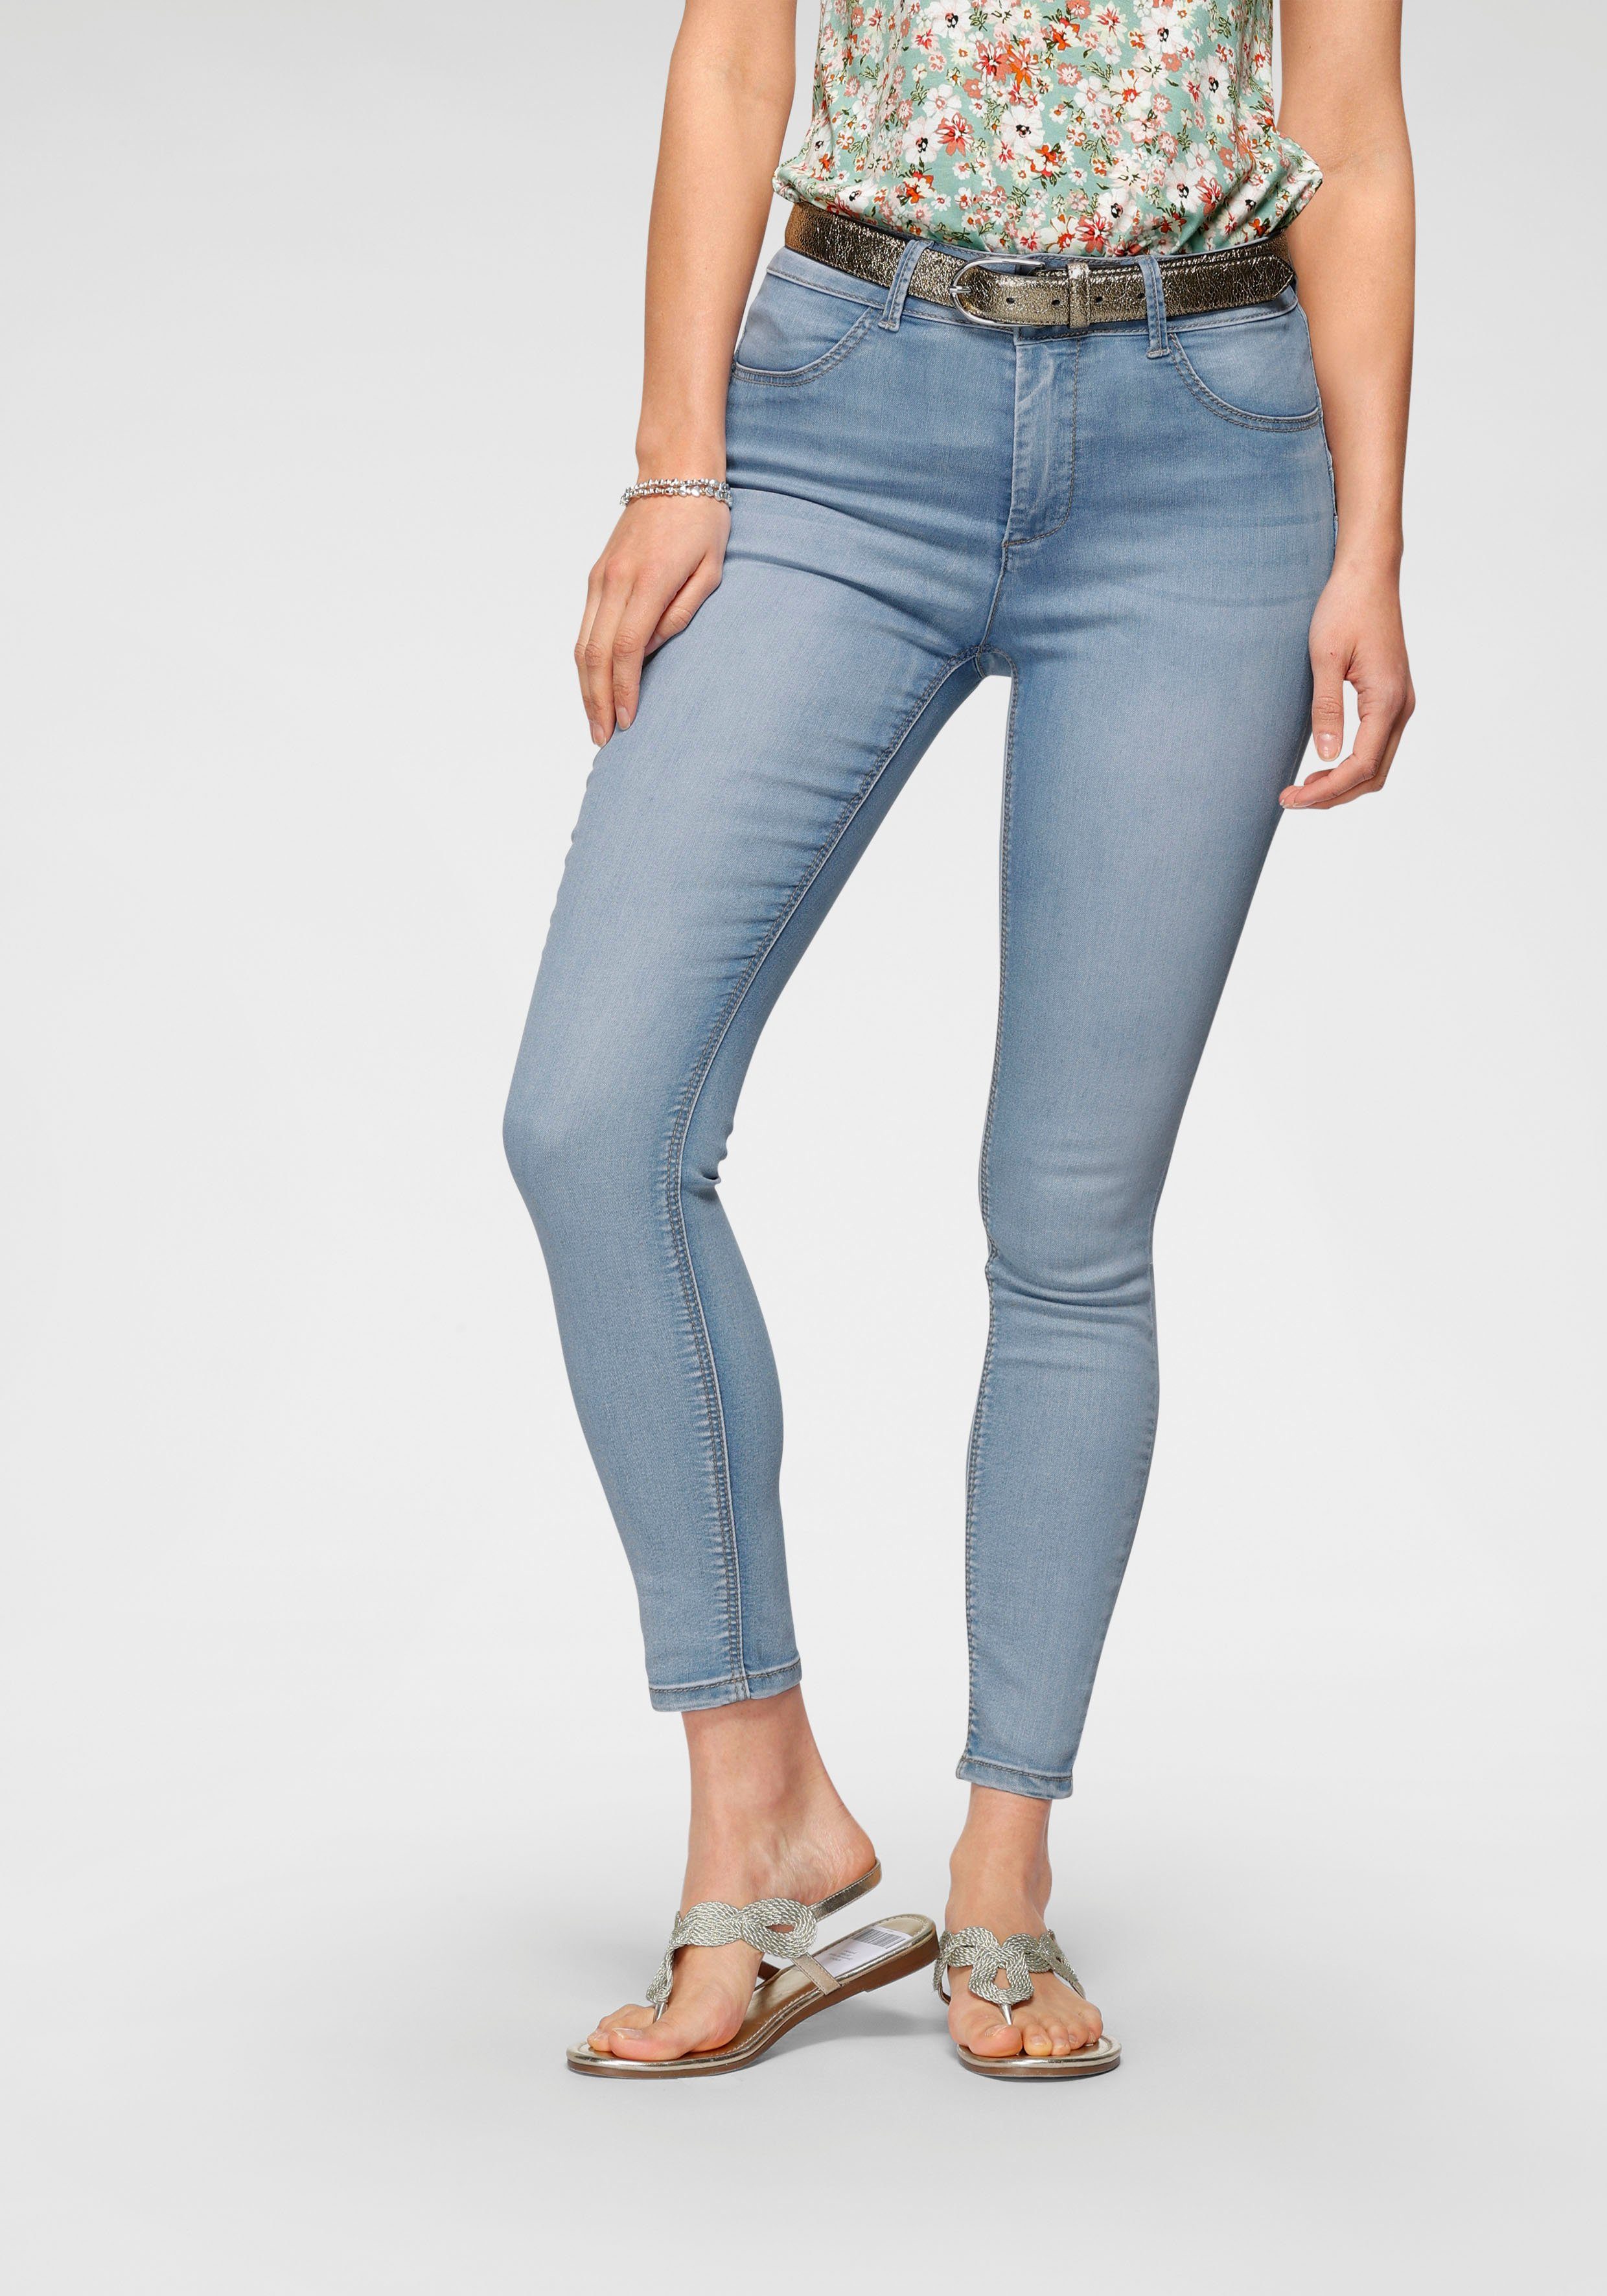 HaILY'S Push-up-Jeans »PUSH« in 7/8- Länge kaufen | OTTO